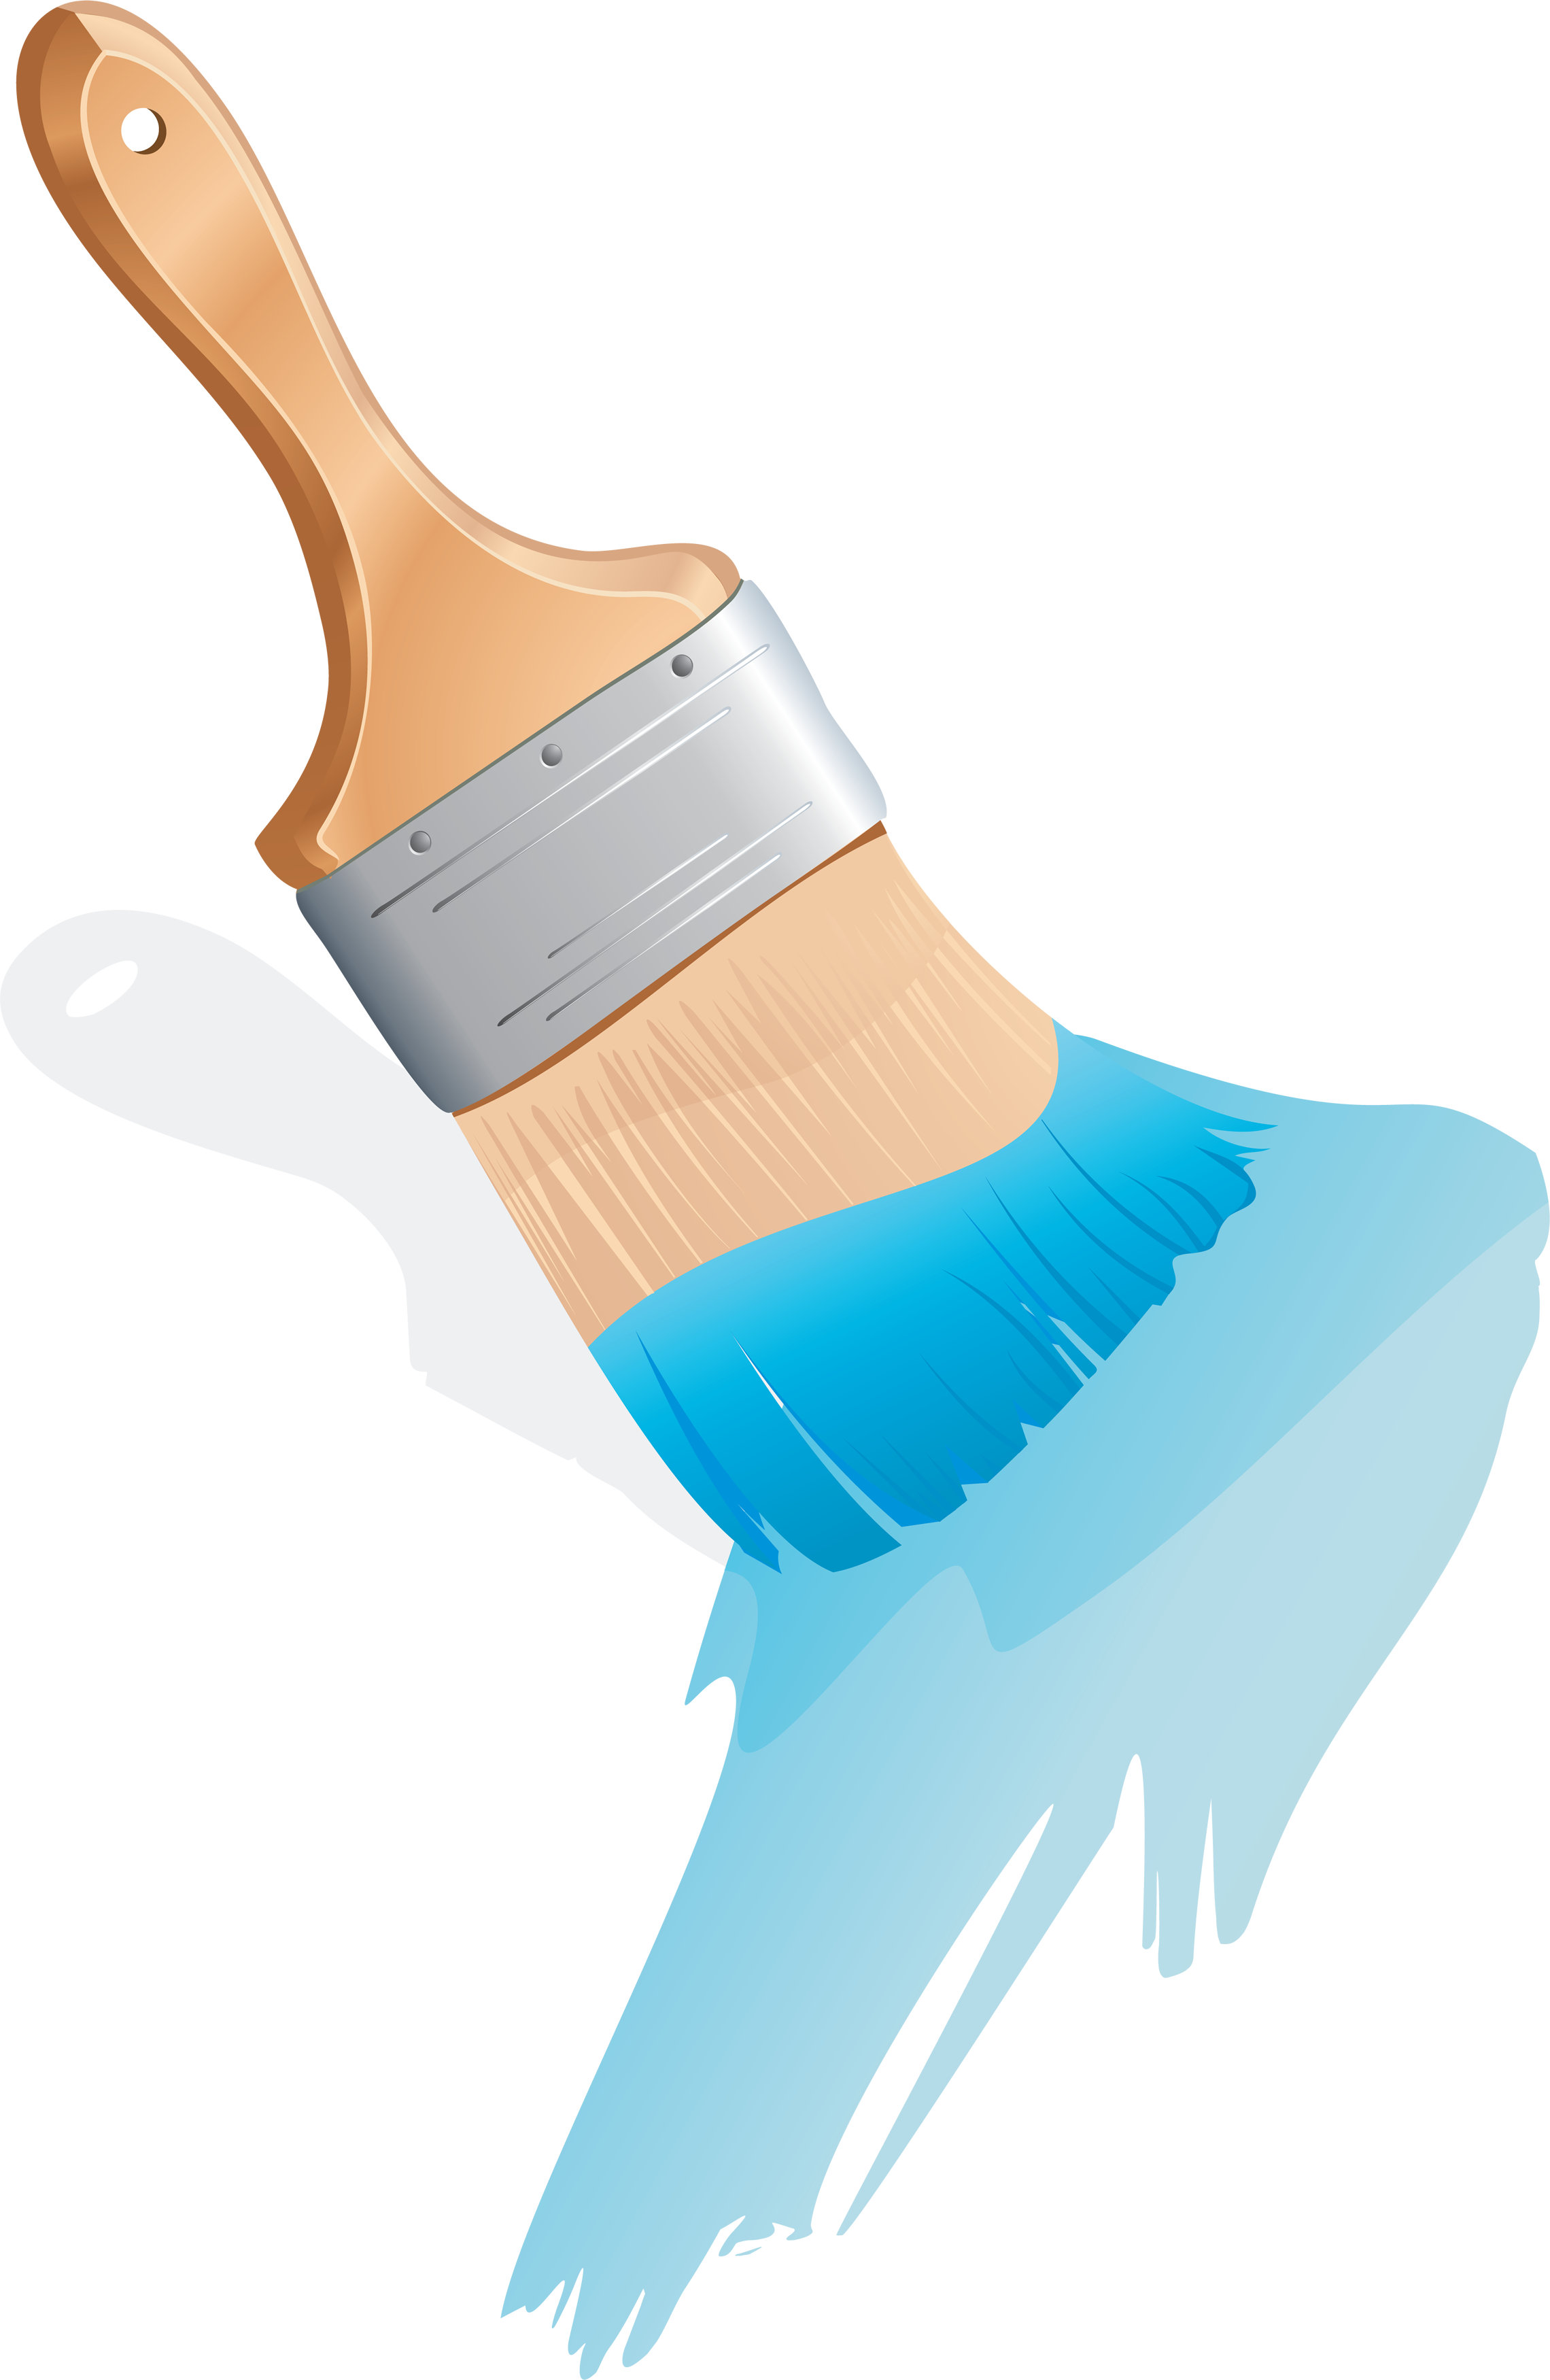 Free Paint Brush PNG Transparent Images, Download Free Paint Brush PNG